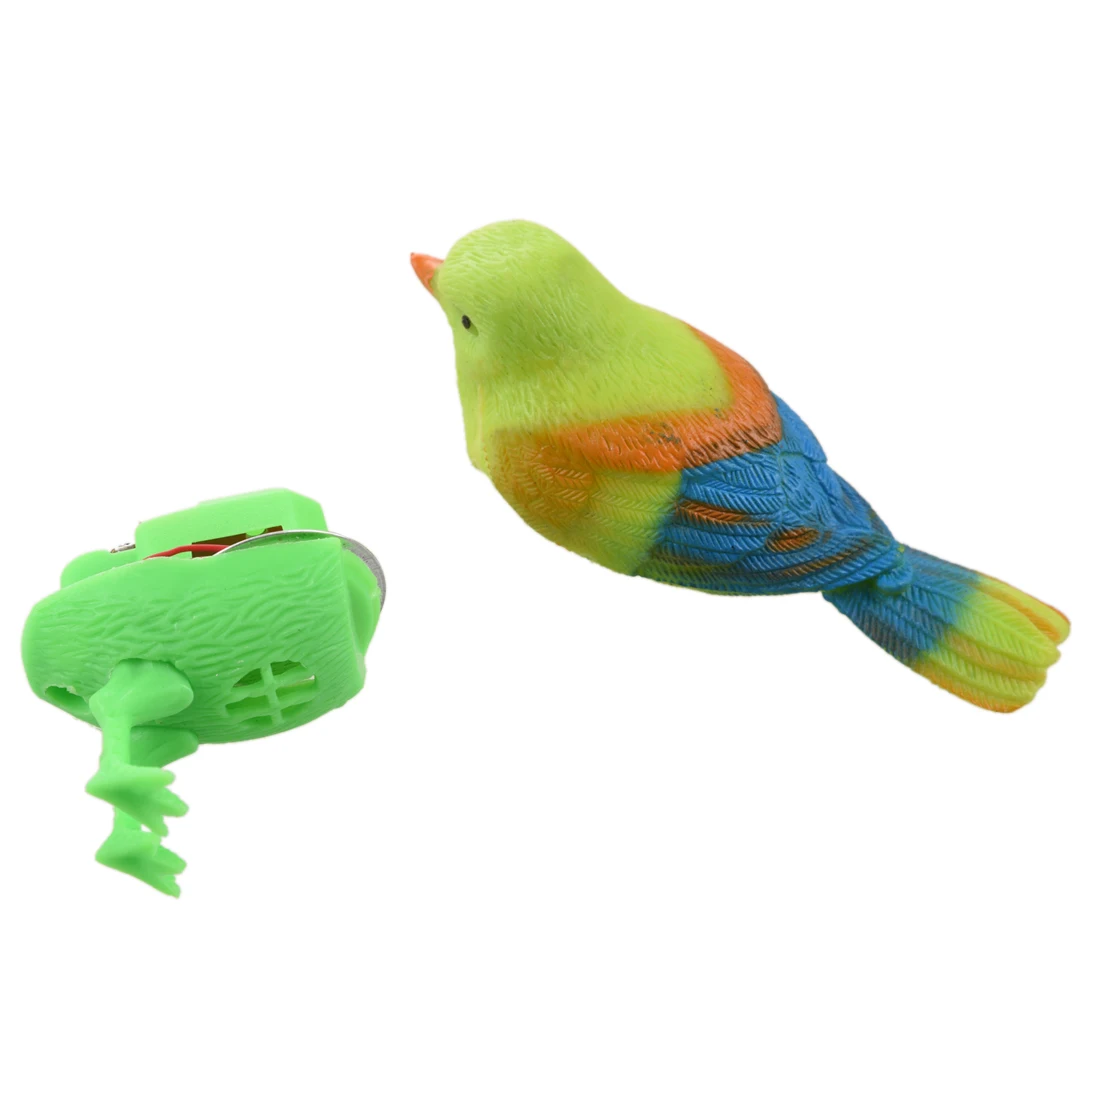 20x New Practical Superior Green Sound Control Beautiful Singing Bird Funny Toy 